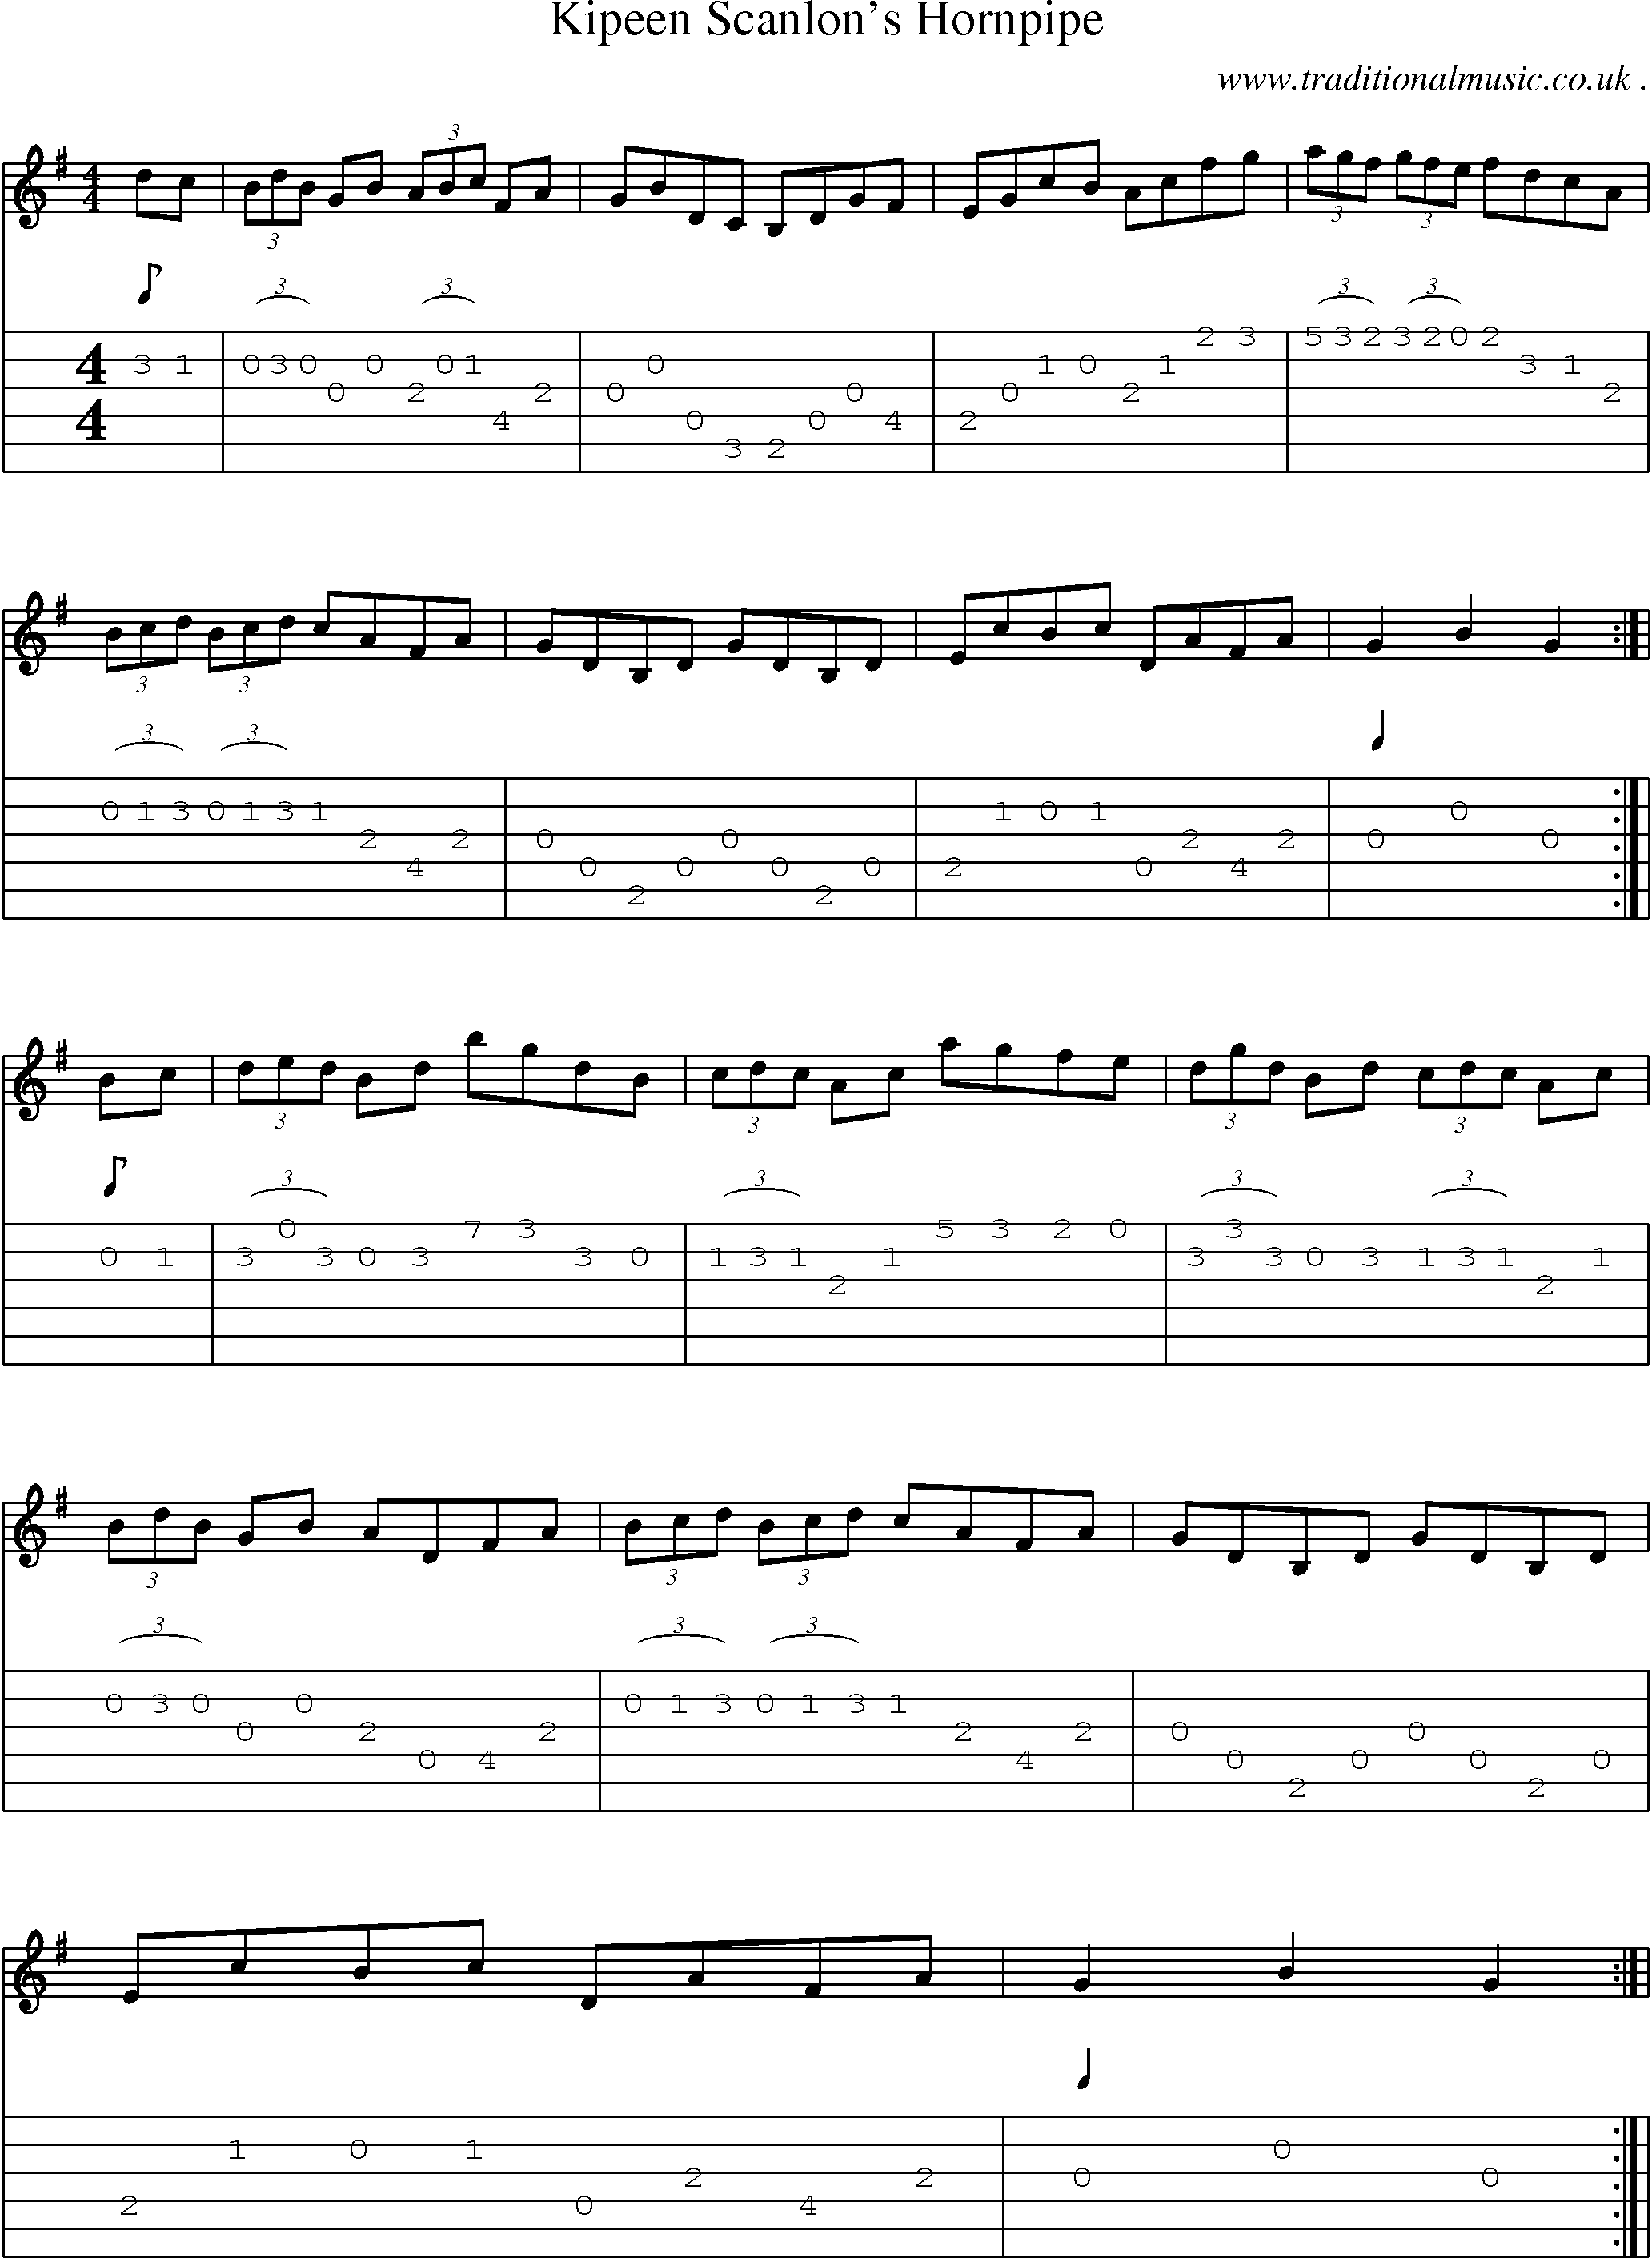 Sheet-Music and Guitar Tabs for Kipeen Scanlons Hornpipe